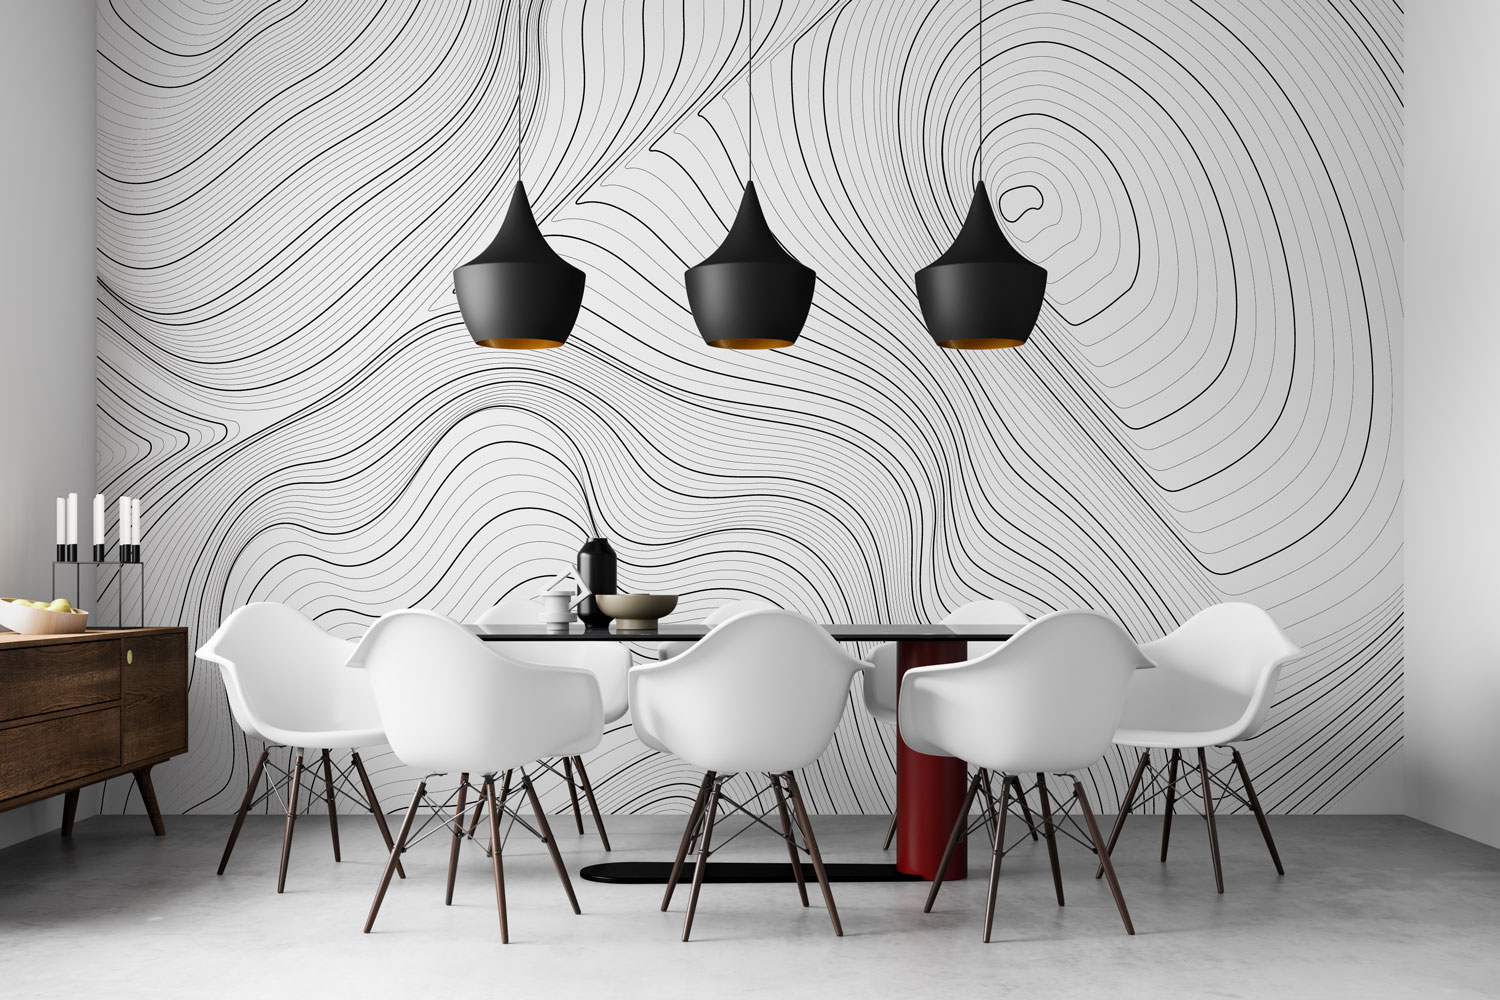 Abstract Line-Art Wallpaper in a dining hall